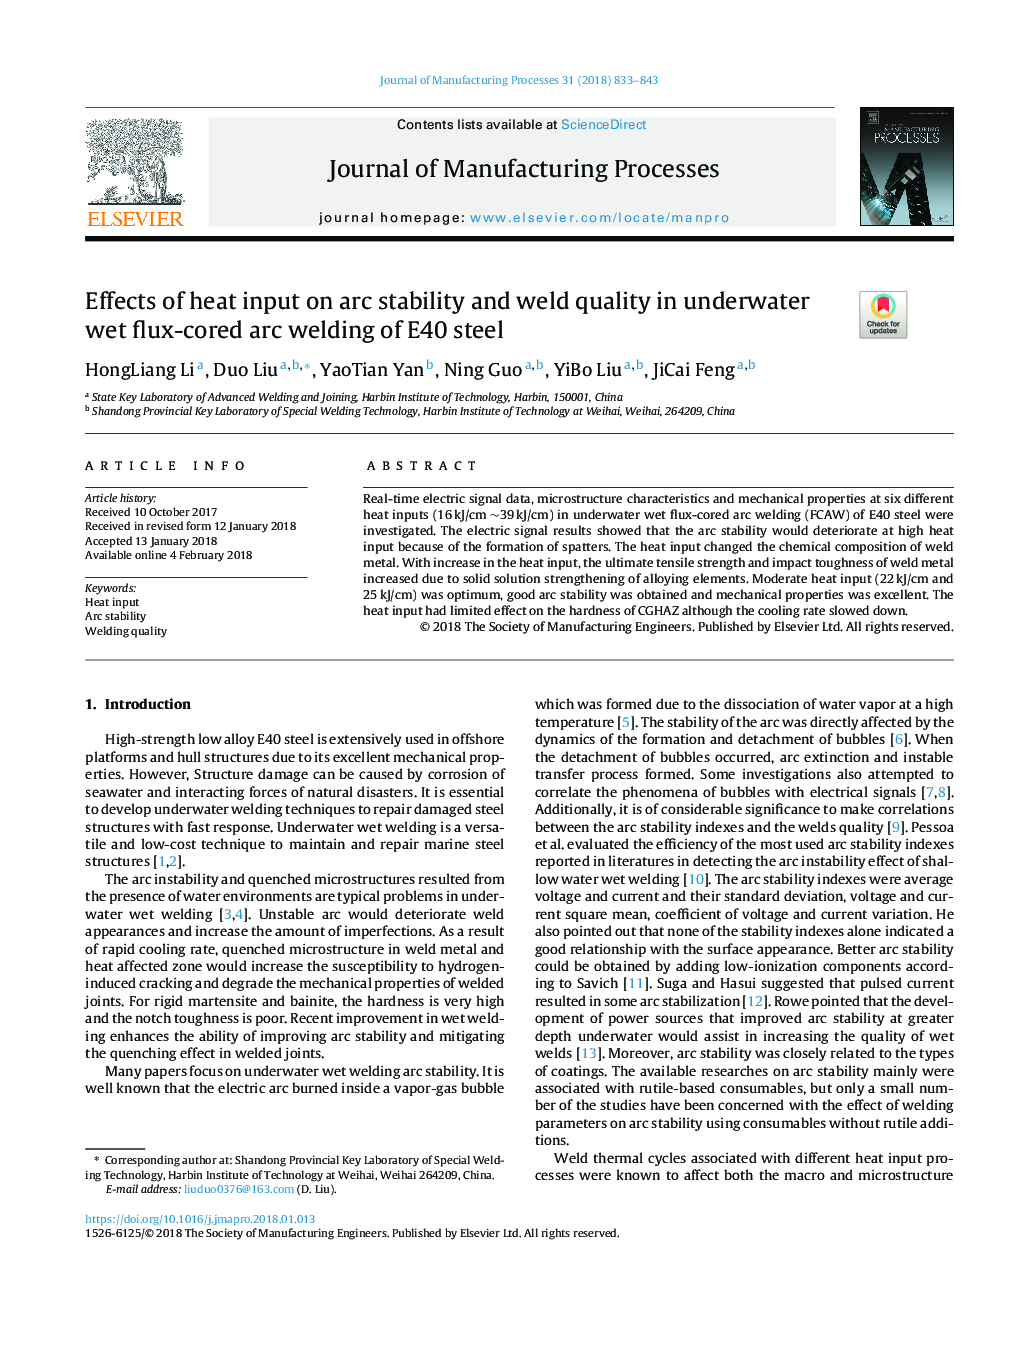 Effects of heat input on arc stability and weld quality in underwater wet flux-cored arc welding of E40 steel